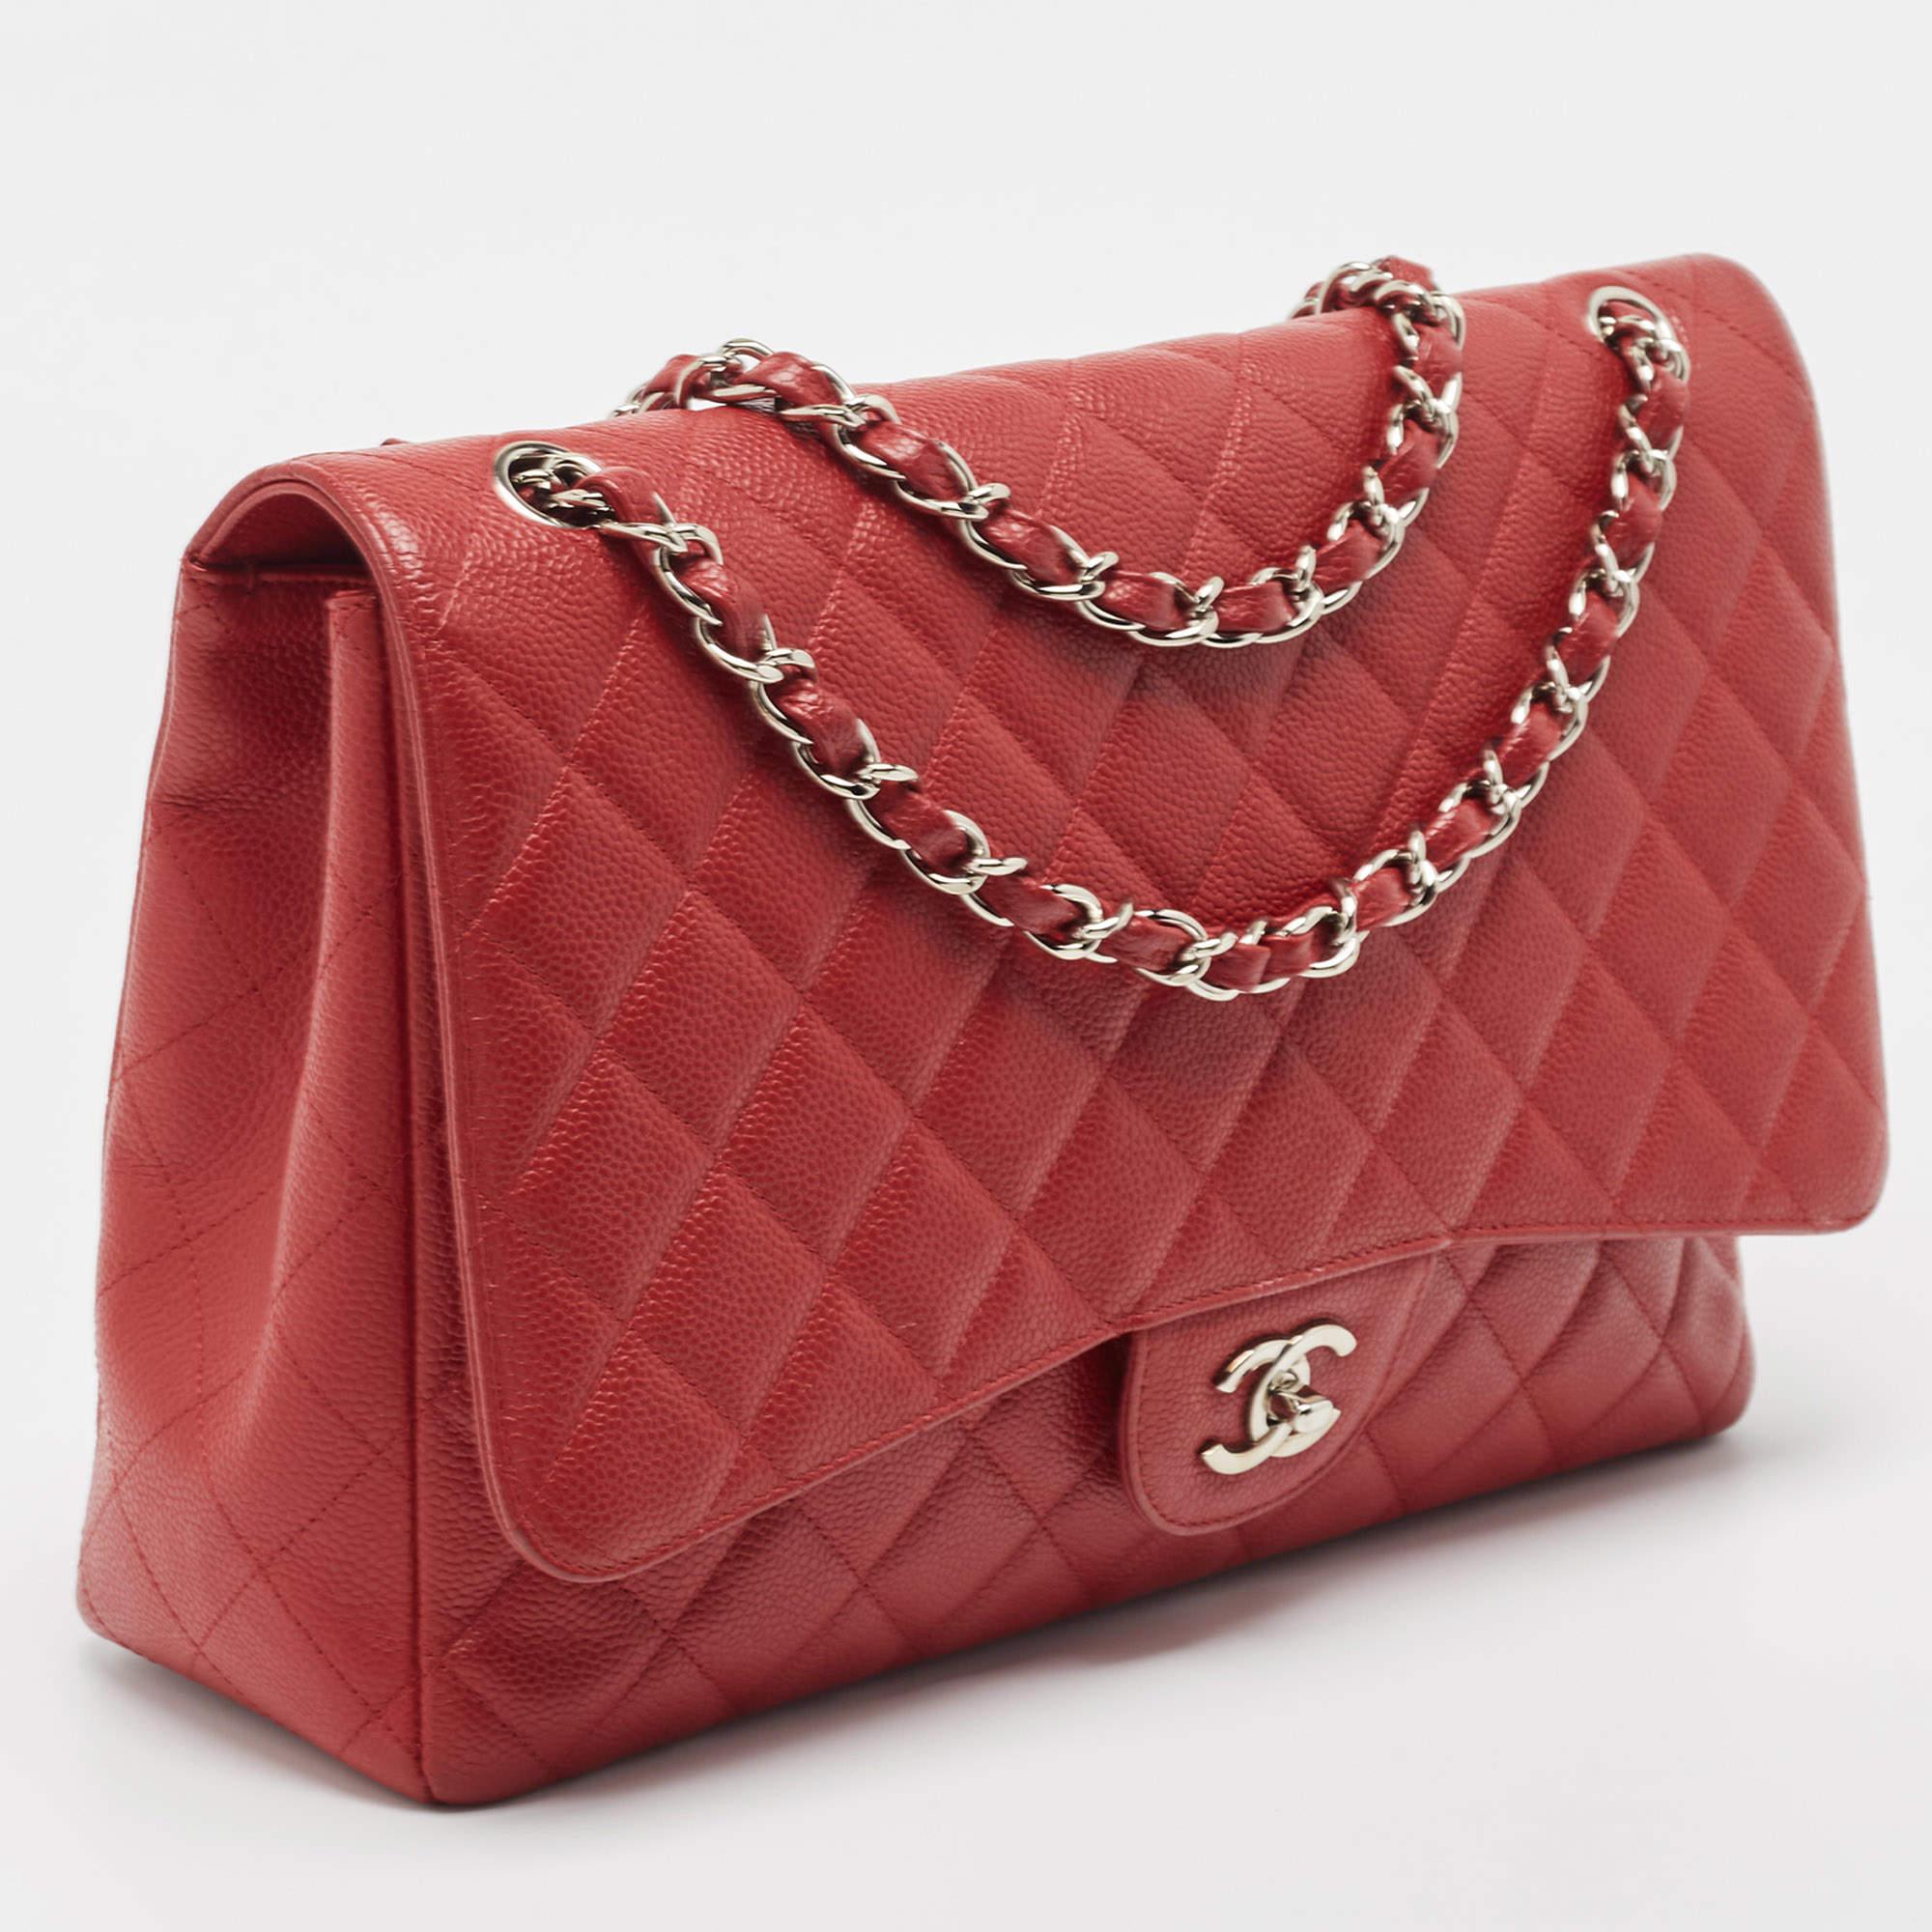 Women's Chanel Red Caviar Leather Maxi Classic Double Flap Bag